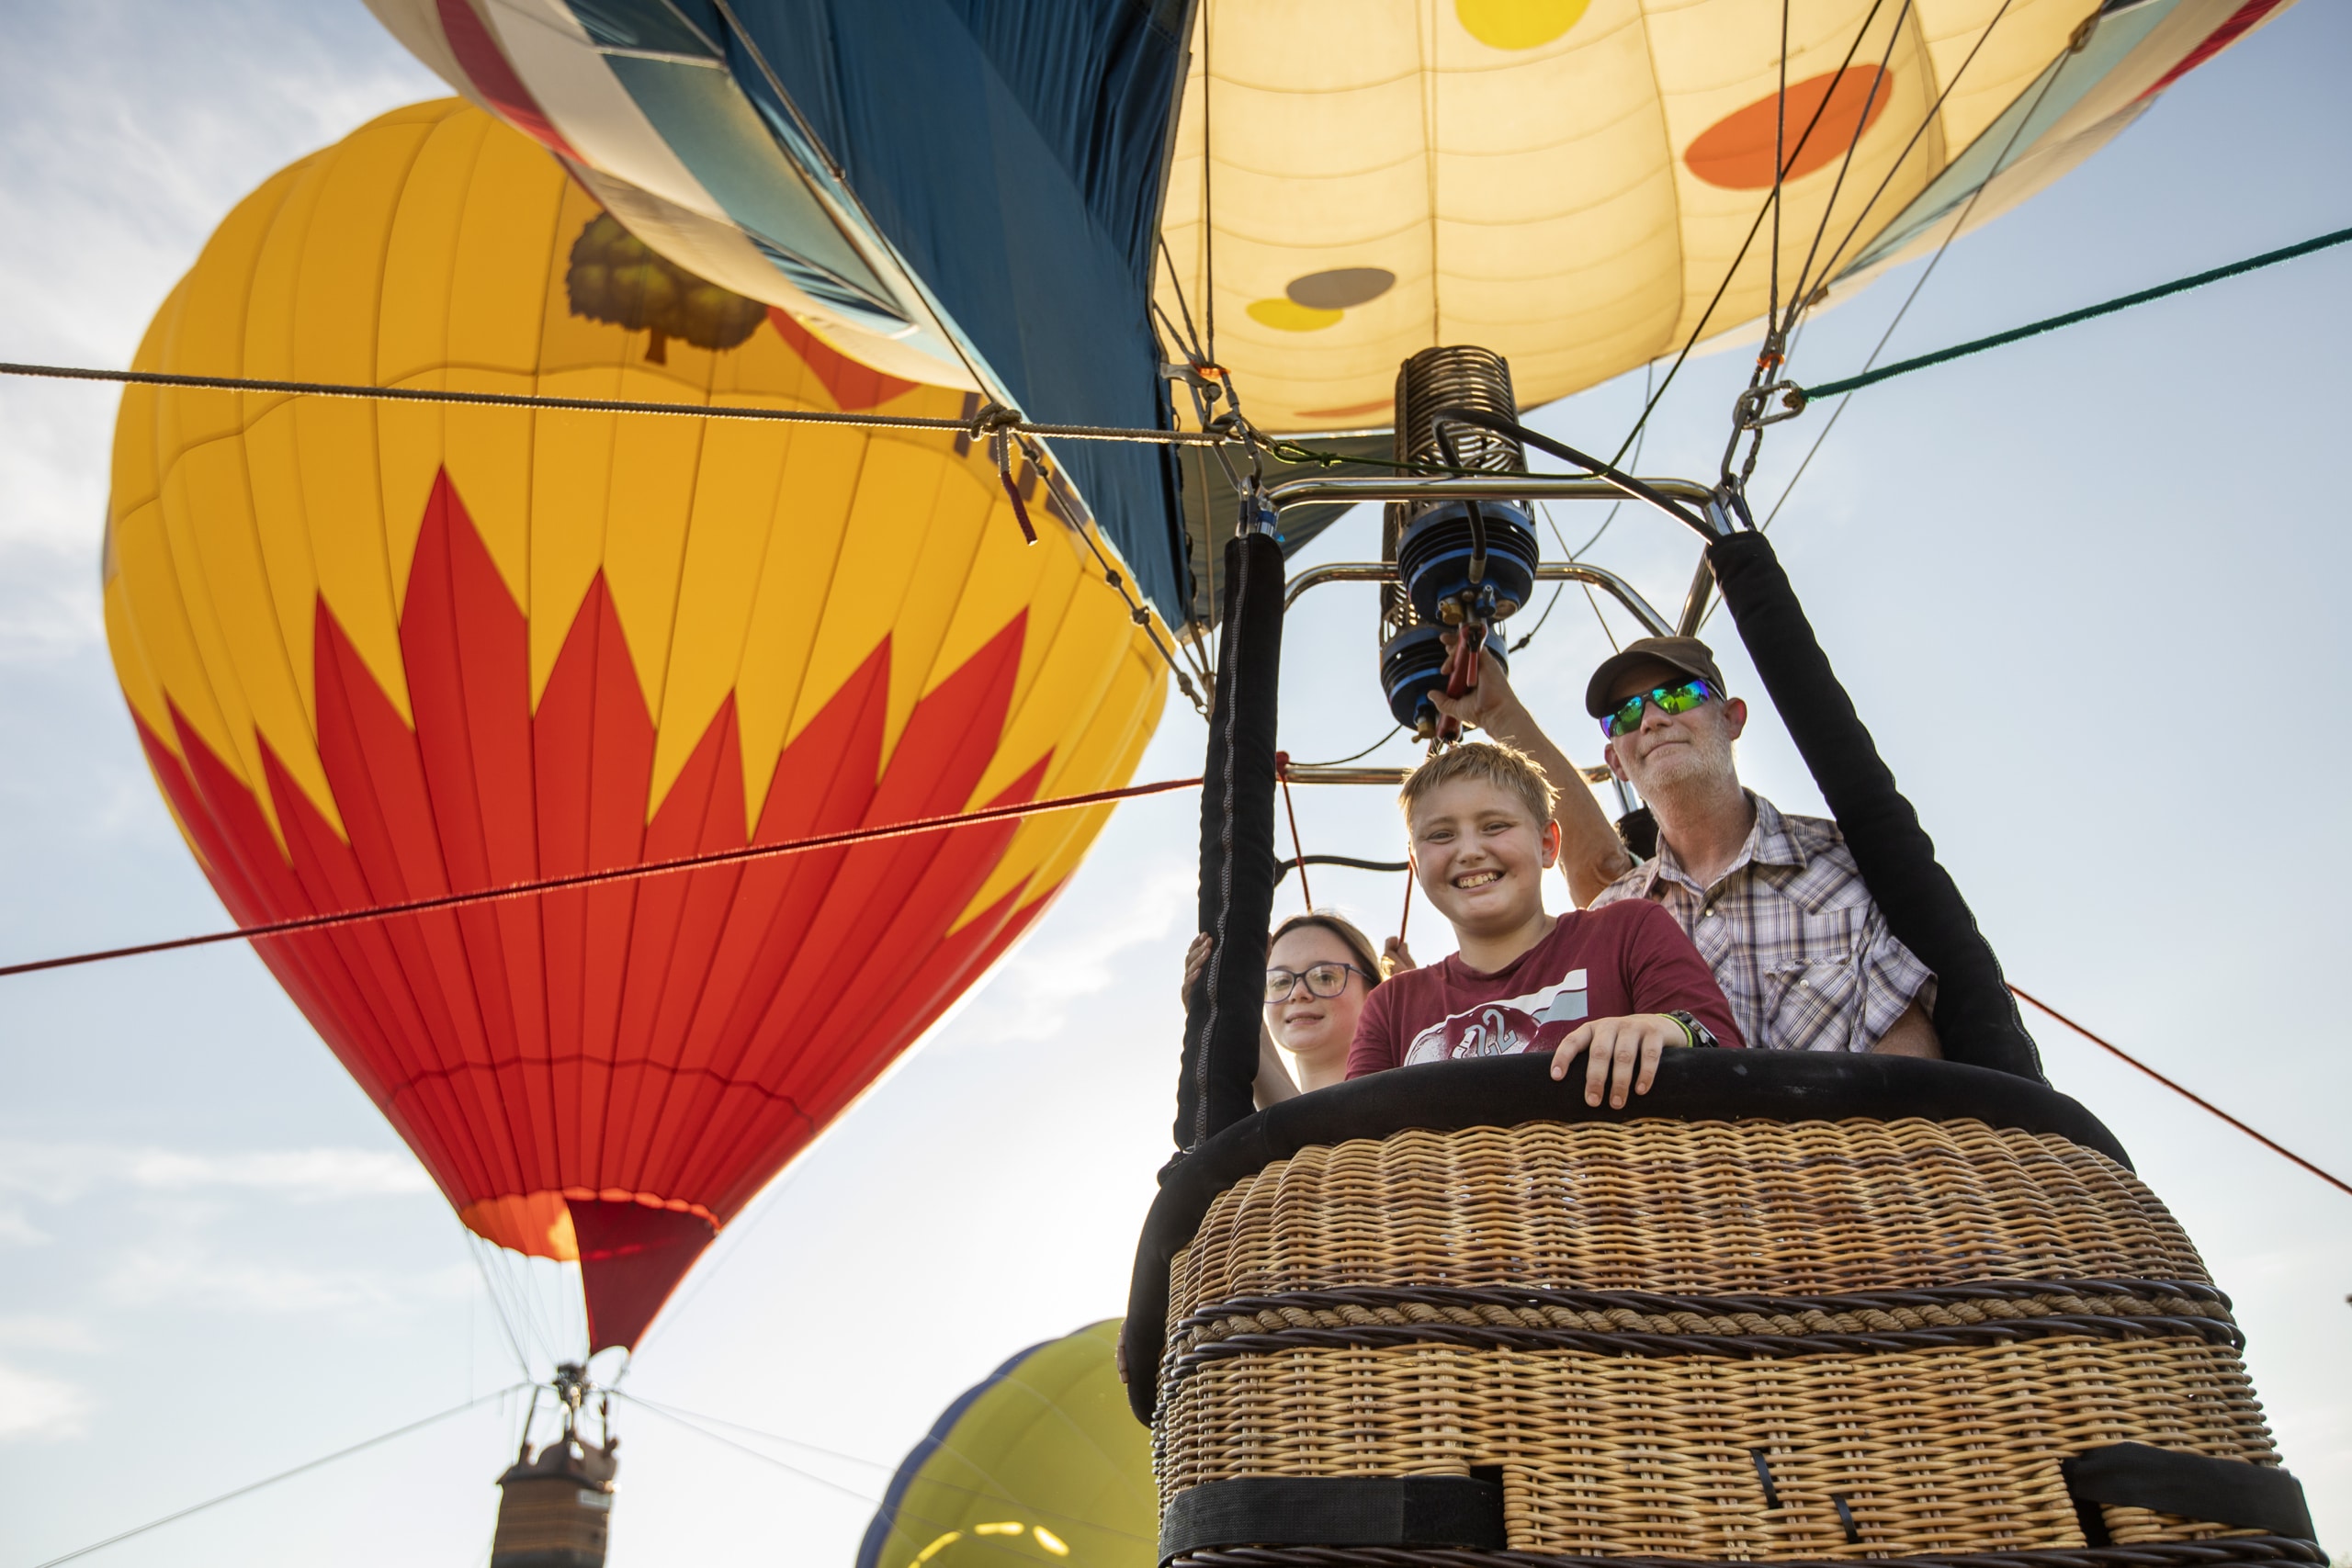 A family looks down from a hot air balloon basket, beaming. Several other hot air balloons are visible in the background.